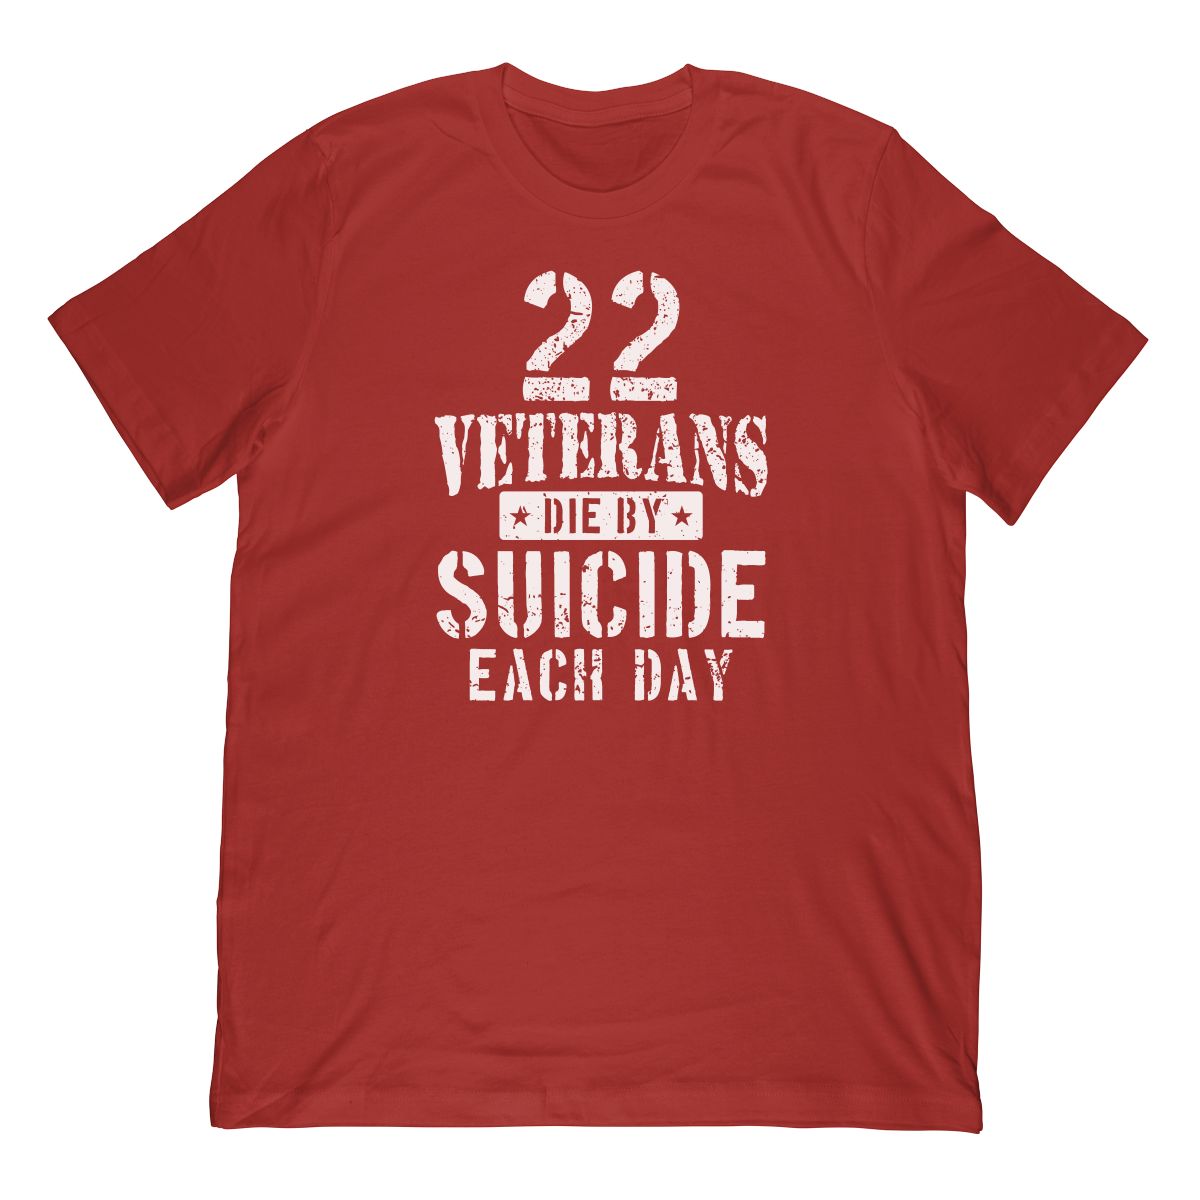 22 Veterans Die By Suicide Each Day T-Shirt